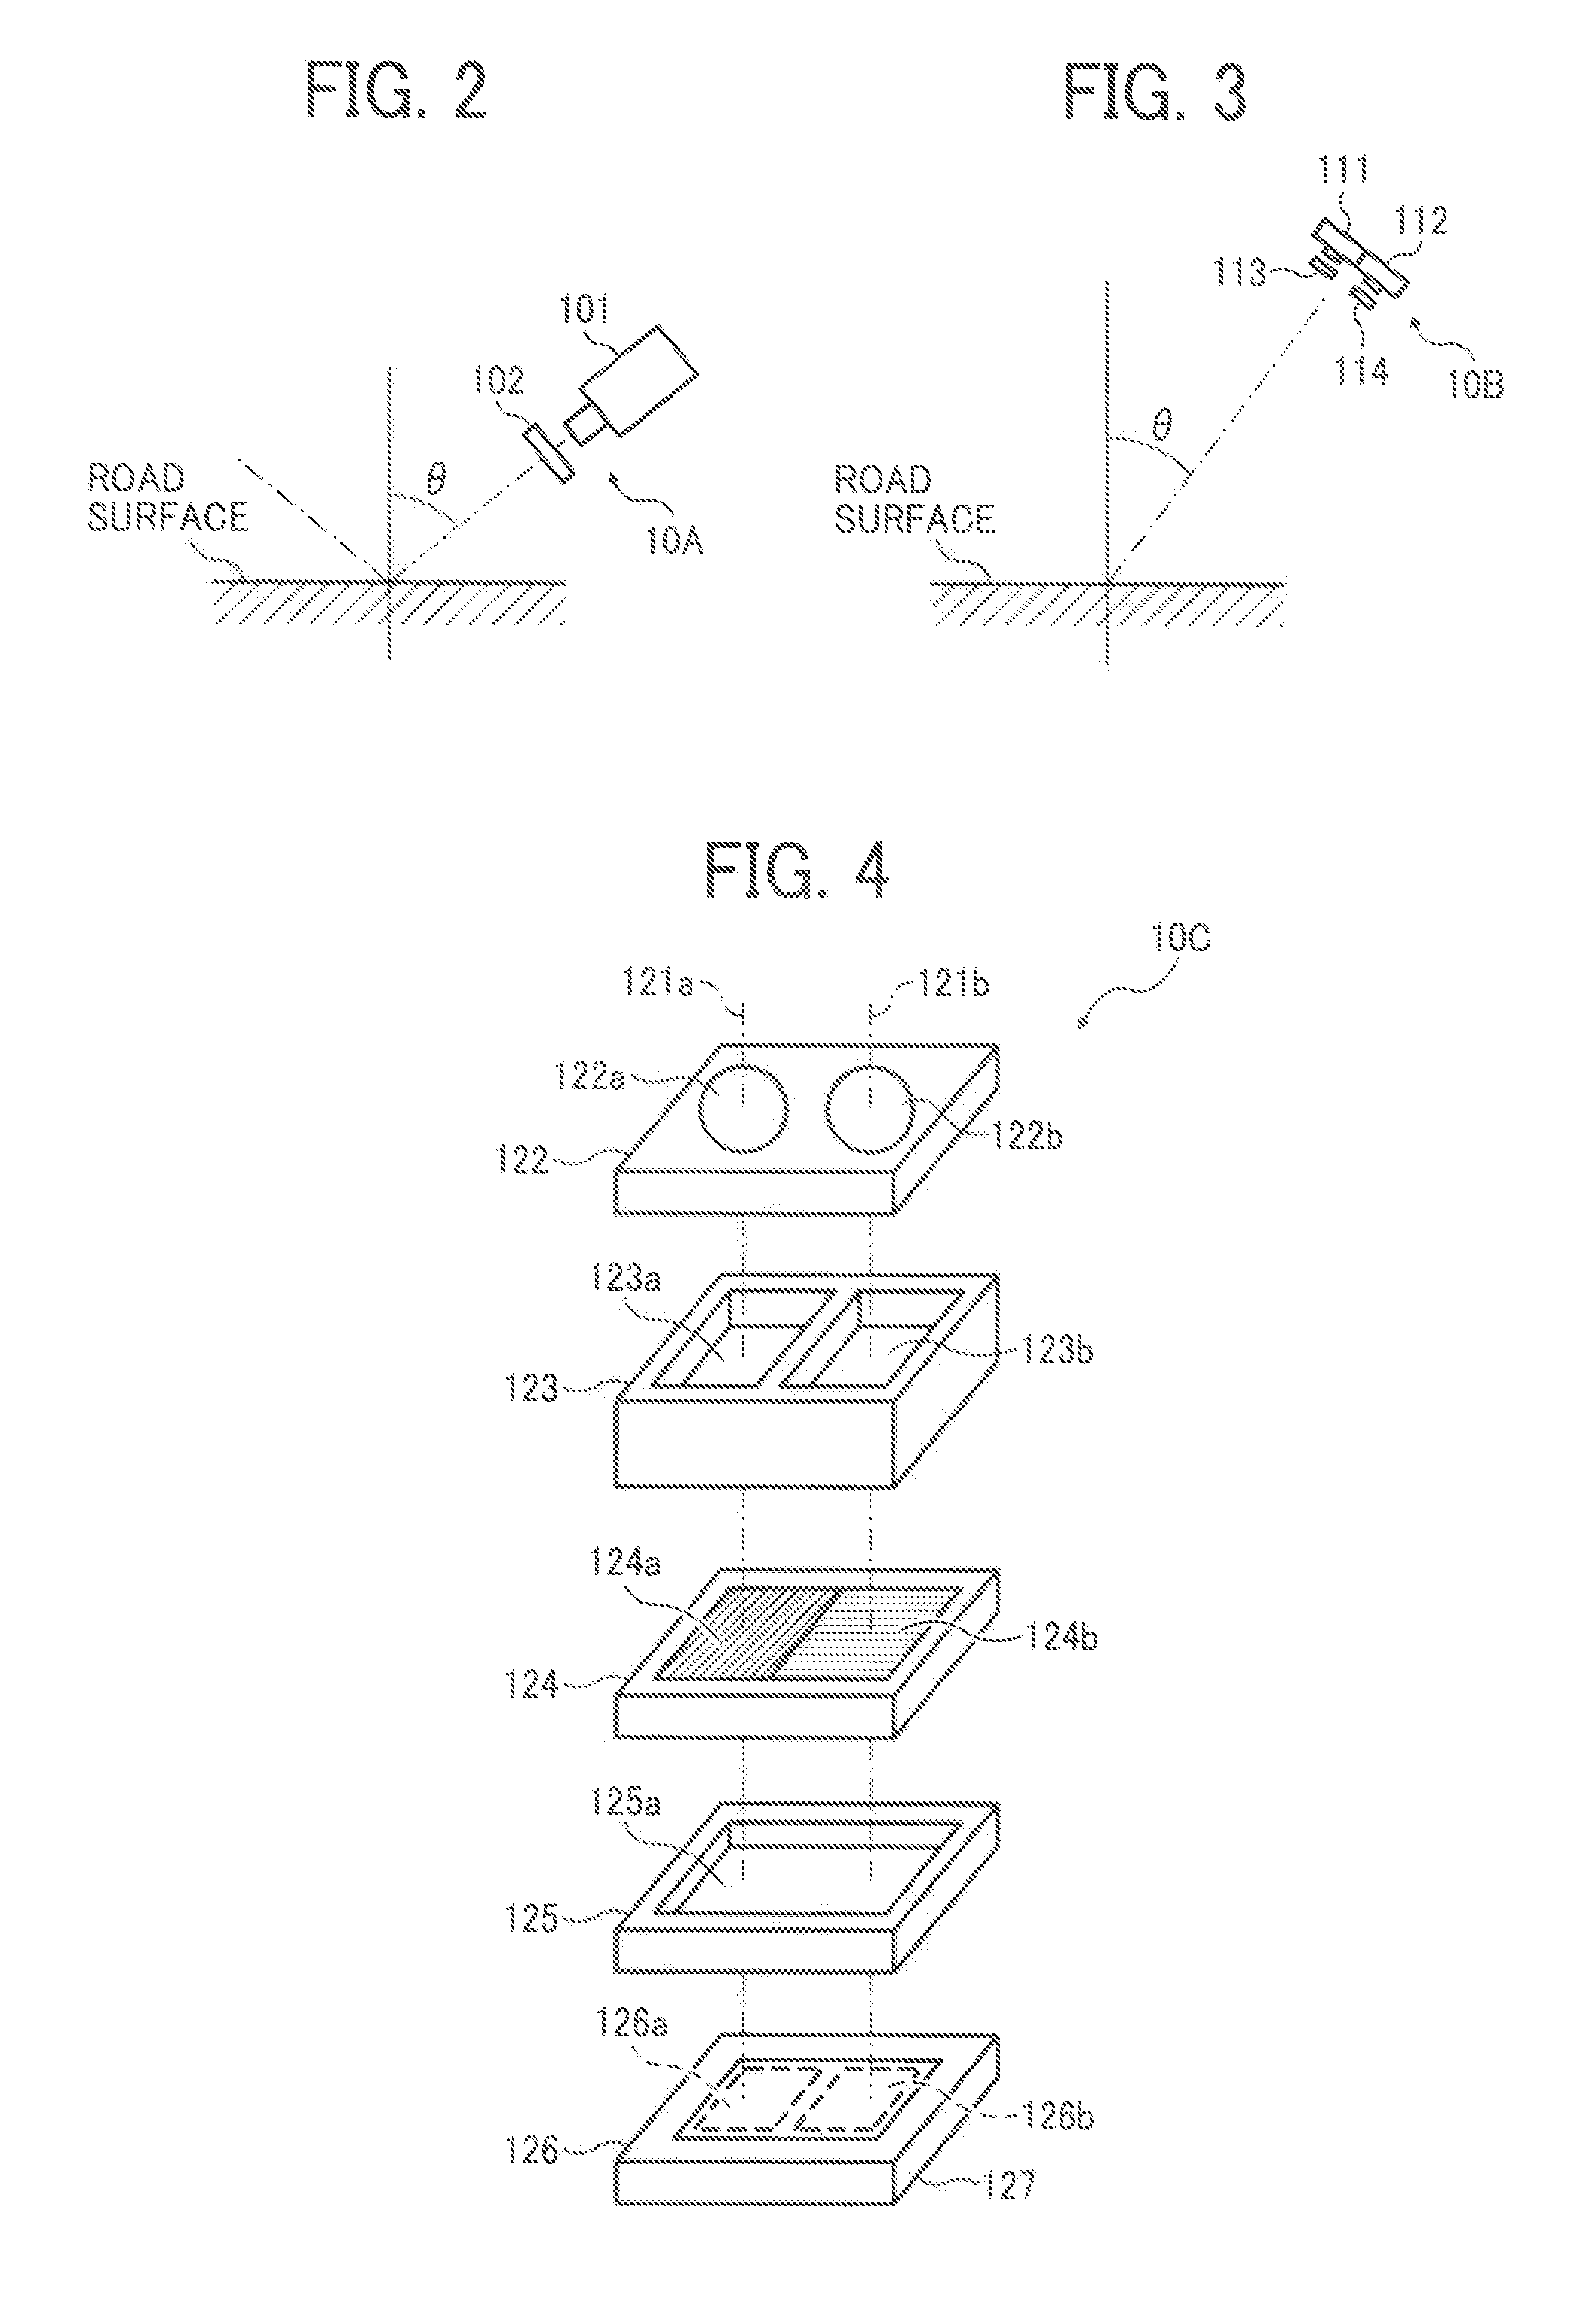 Object identification device, moving object controlling apparatus having object identification device, information presenting apparatus having object identification device, and spectroscopic image capturing apparatus